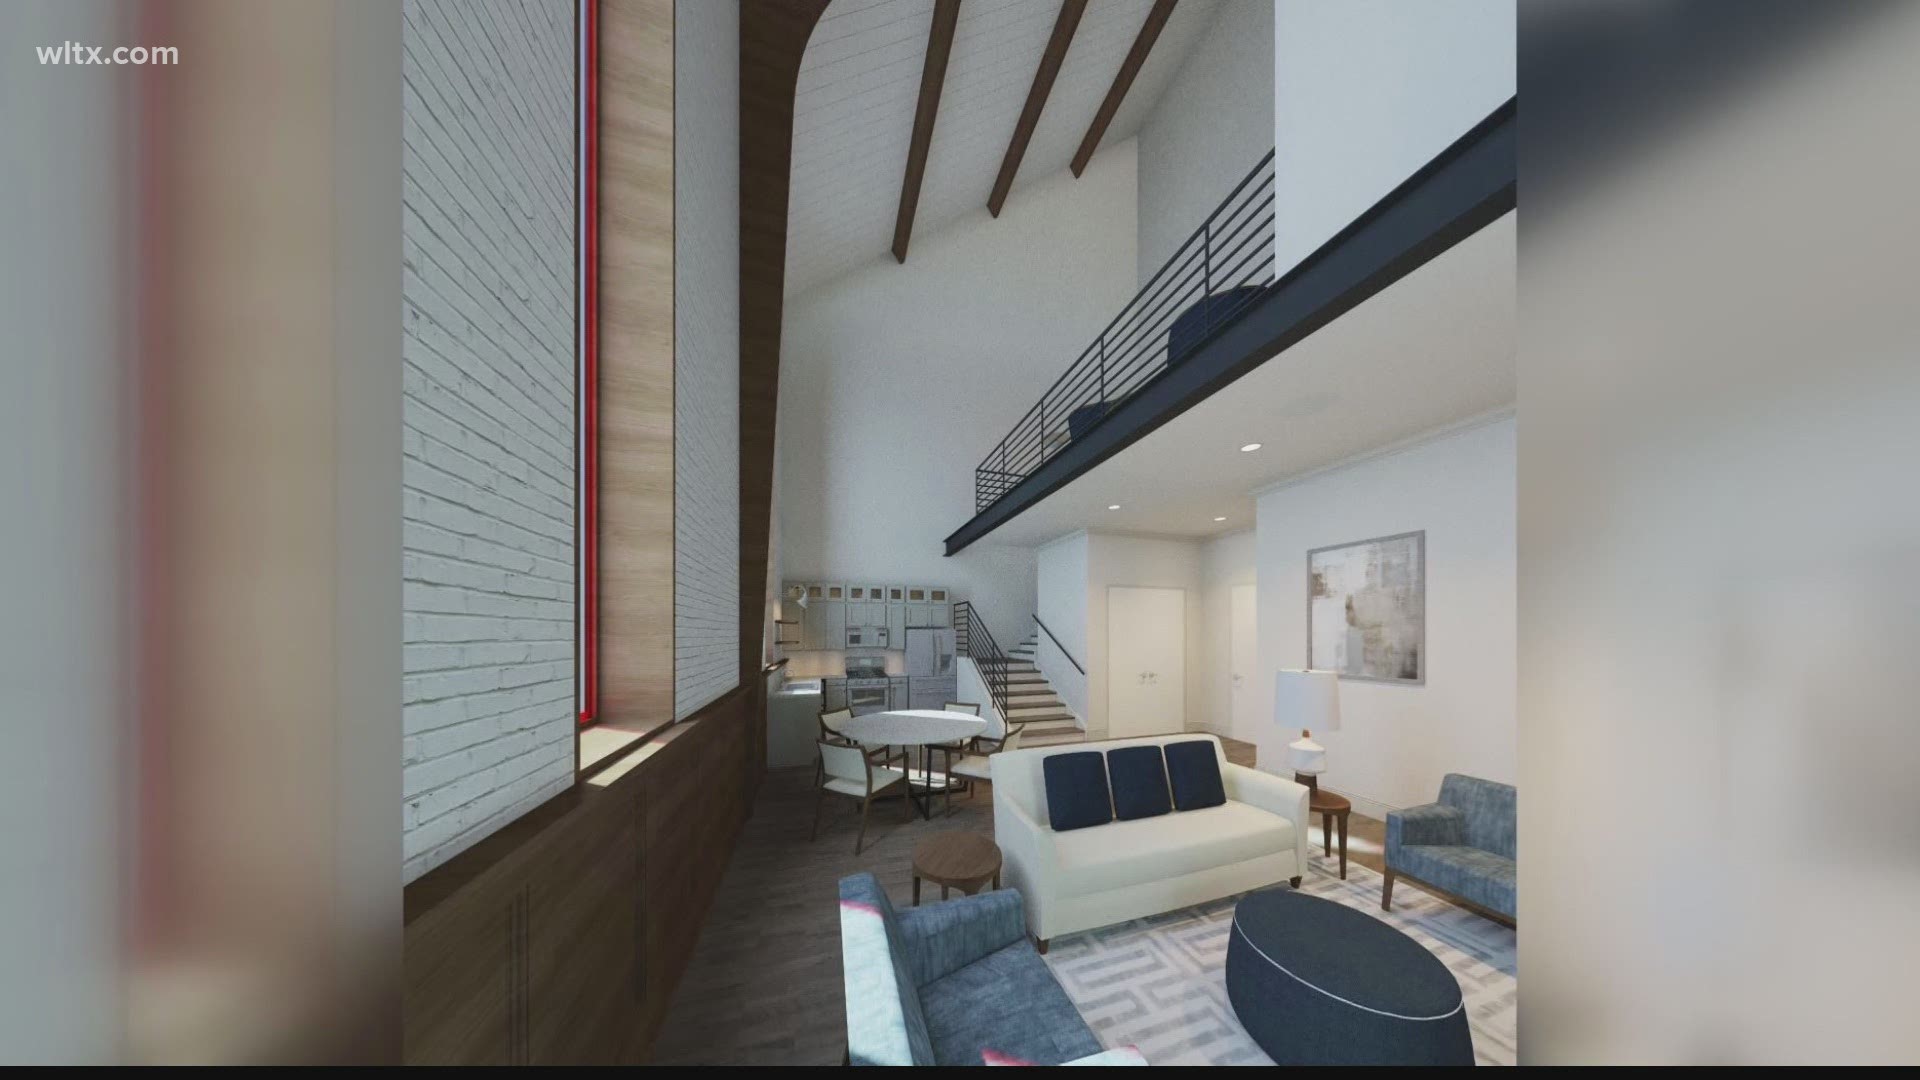 A former church in Columbia is being converted into high-end apartments and a Starbucks.